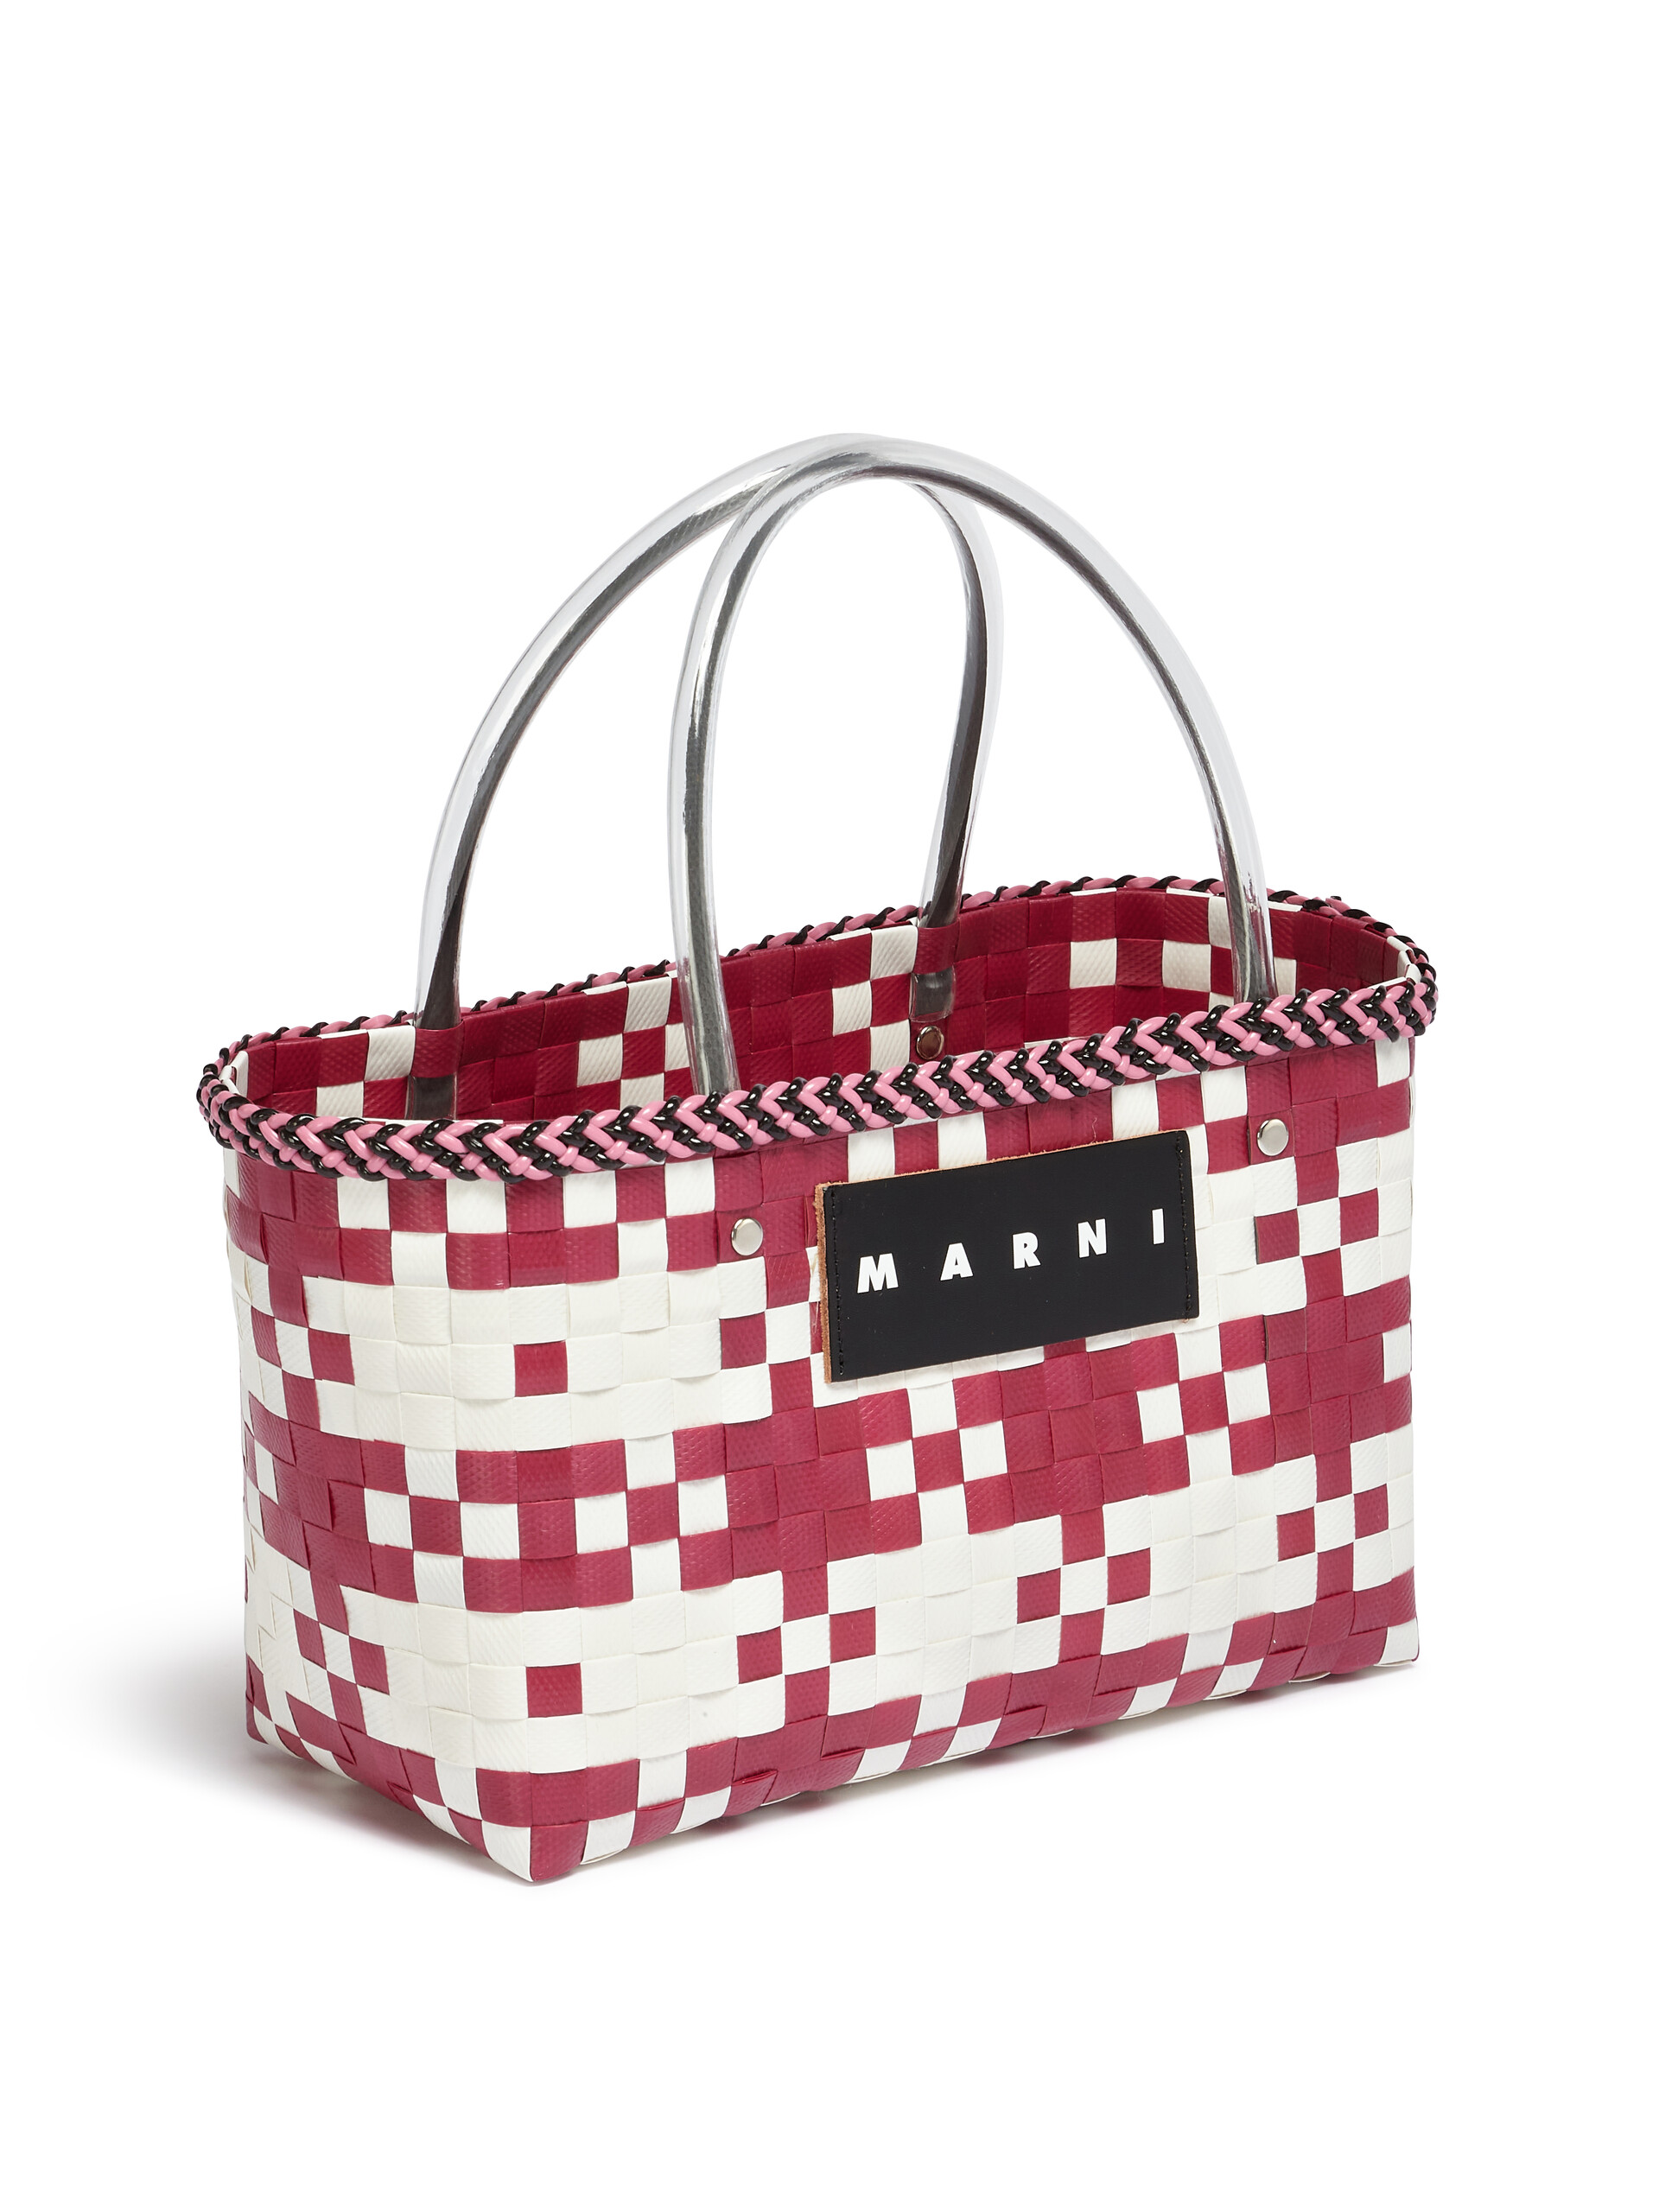 MARNI MARKET CHECK in red and white tartan woven material - Bags - Image 4